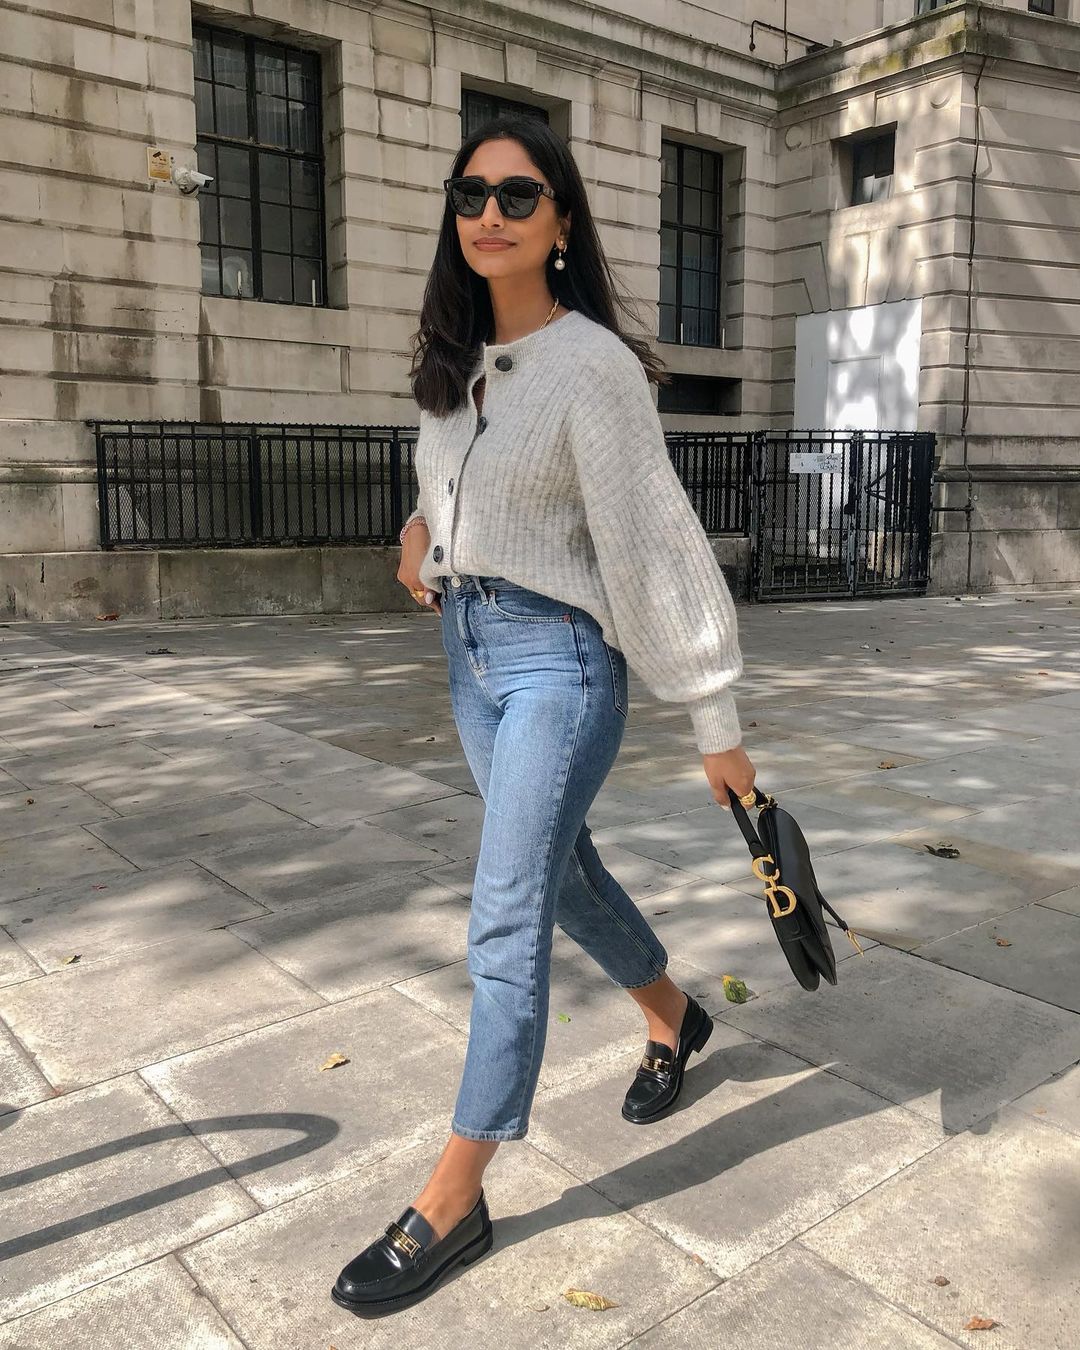 Jeans and Loafers: @cocobeautea wears jeans and loafers